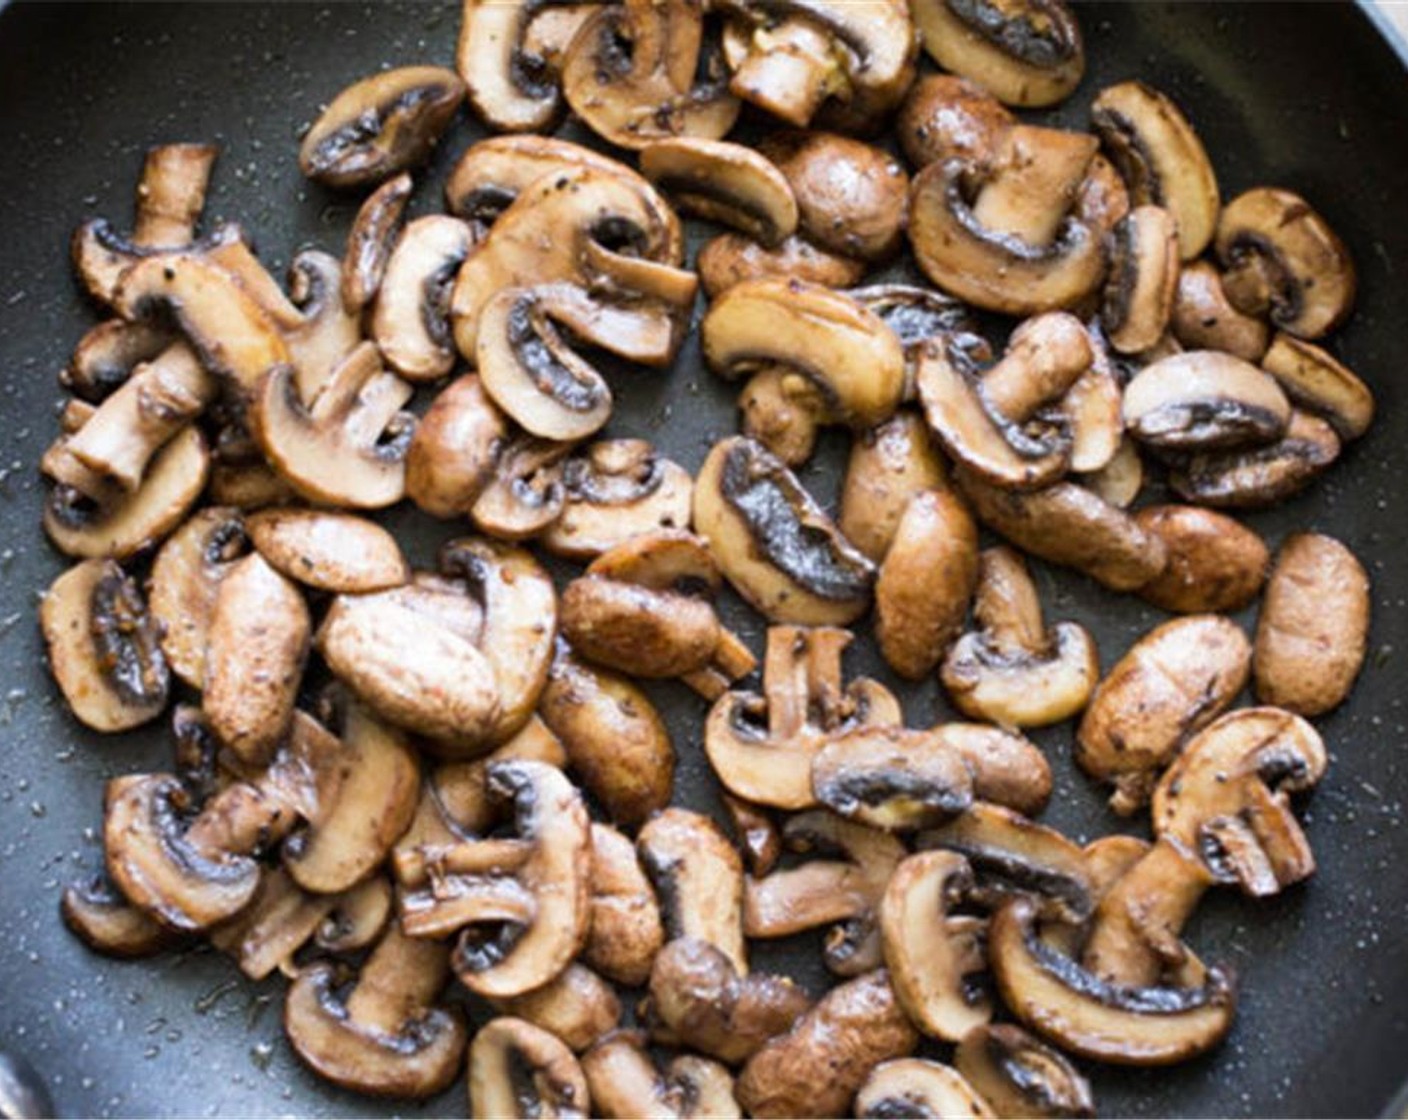 step 7 Place the Cremini Mushrooms (4 1/2 cups) in a large, non-stick skillet over medium heat with 1 tablespoon extra virgin olive oil, McCormick® Garlic Powder (1/2 tsp) and 1/4 cup water. Stir so mushrooms are evenly coated. Cover with a tight fitting lid and let cook for 5-7 minutes.